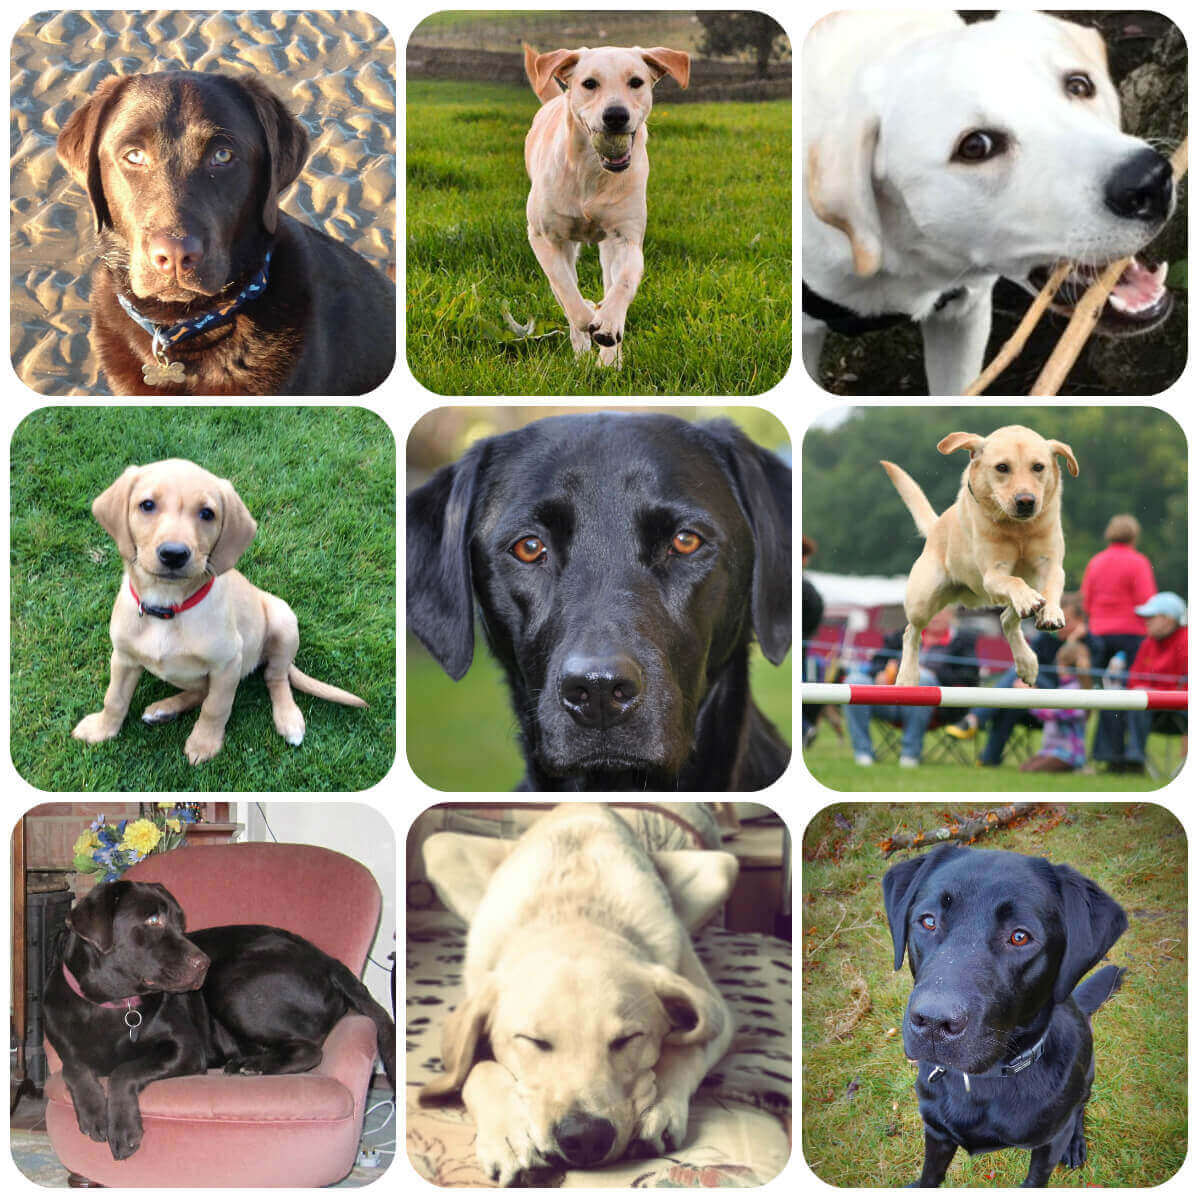 A collage of images of Labradors. They range in colour from white to black and chocolate. All are quite large with square heads and floppy ears.